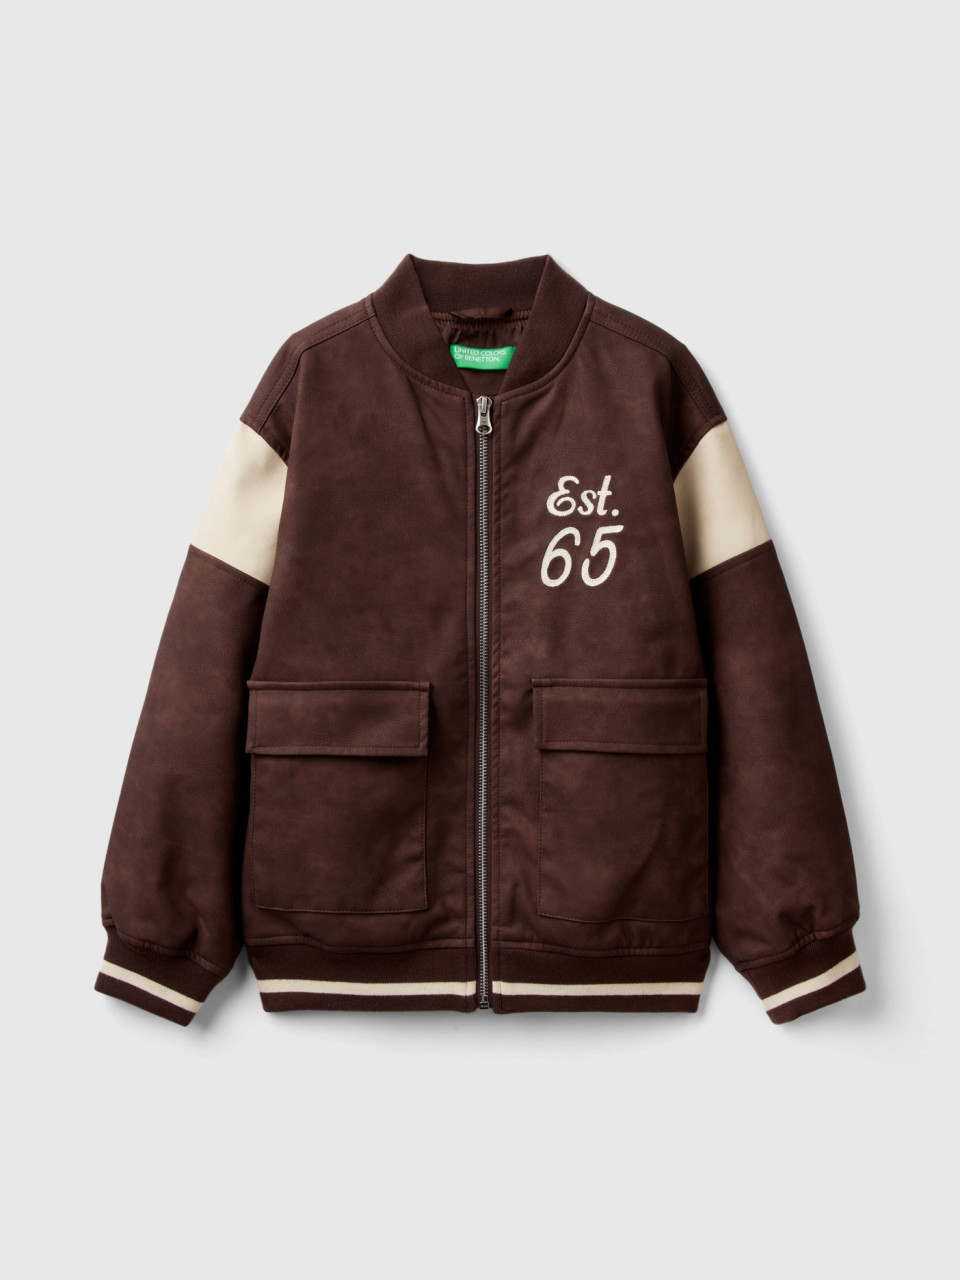 Benetton, Bomber Jacket In Imitation Leather With Embroidery, Brown, Kids